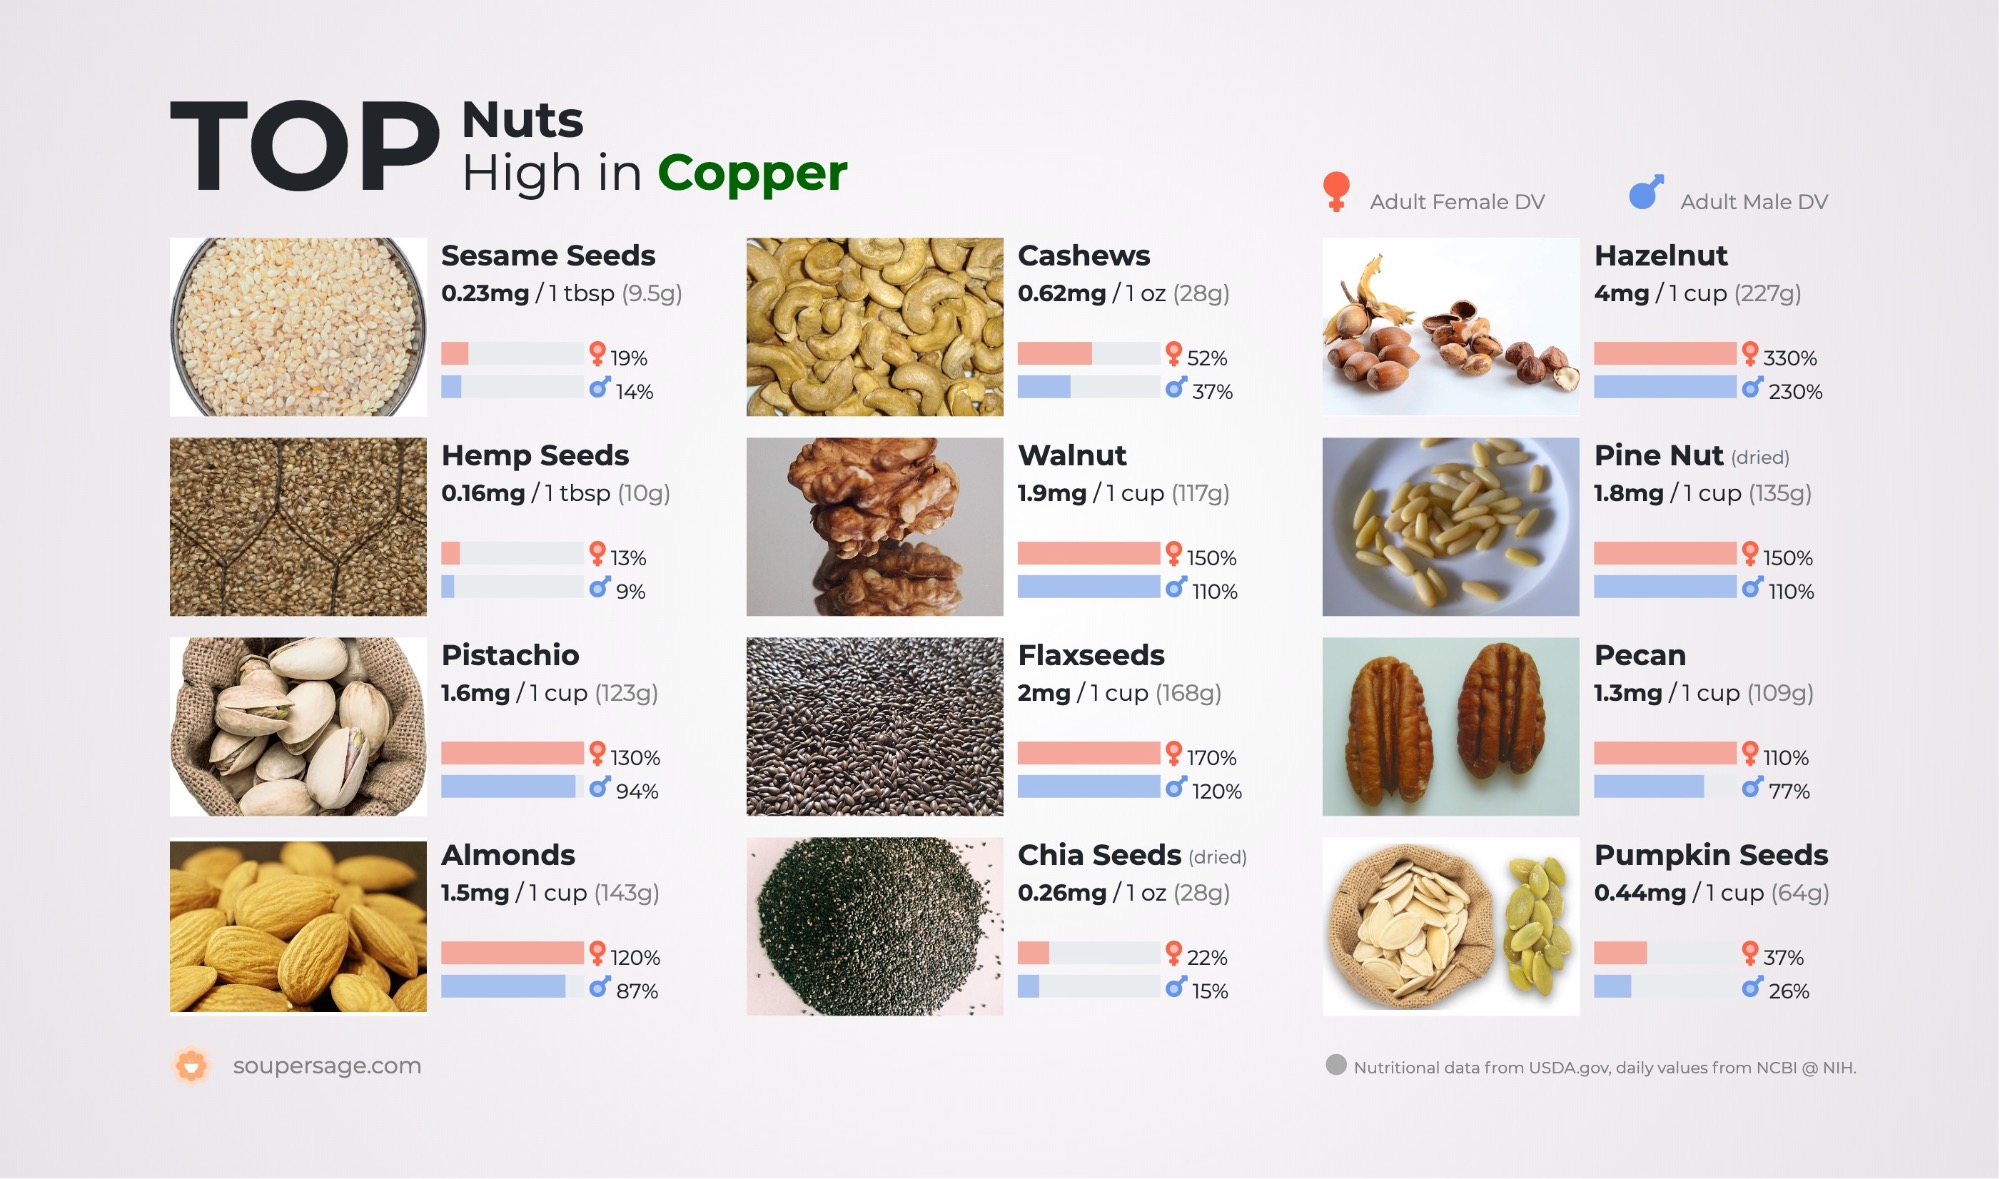 image of Top Nuts High in Copper